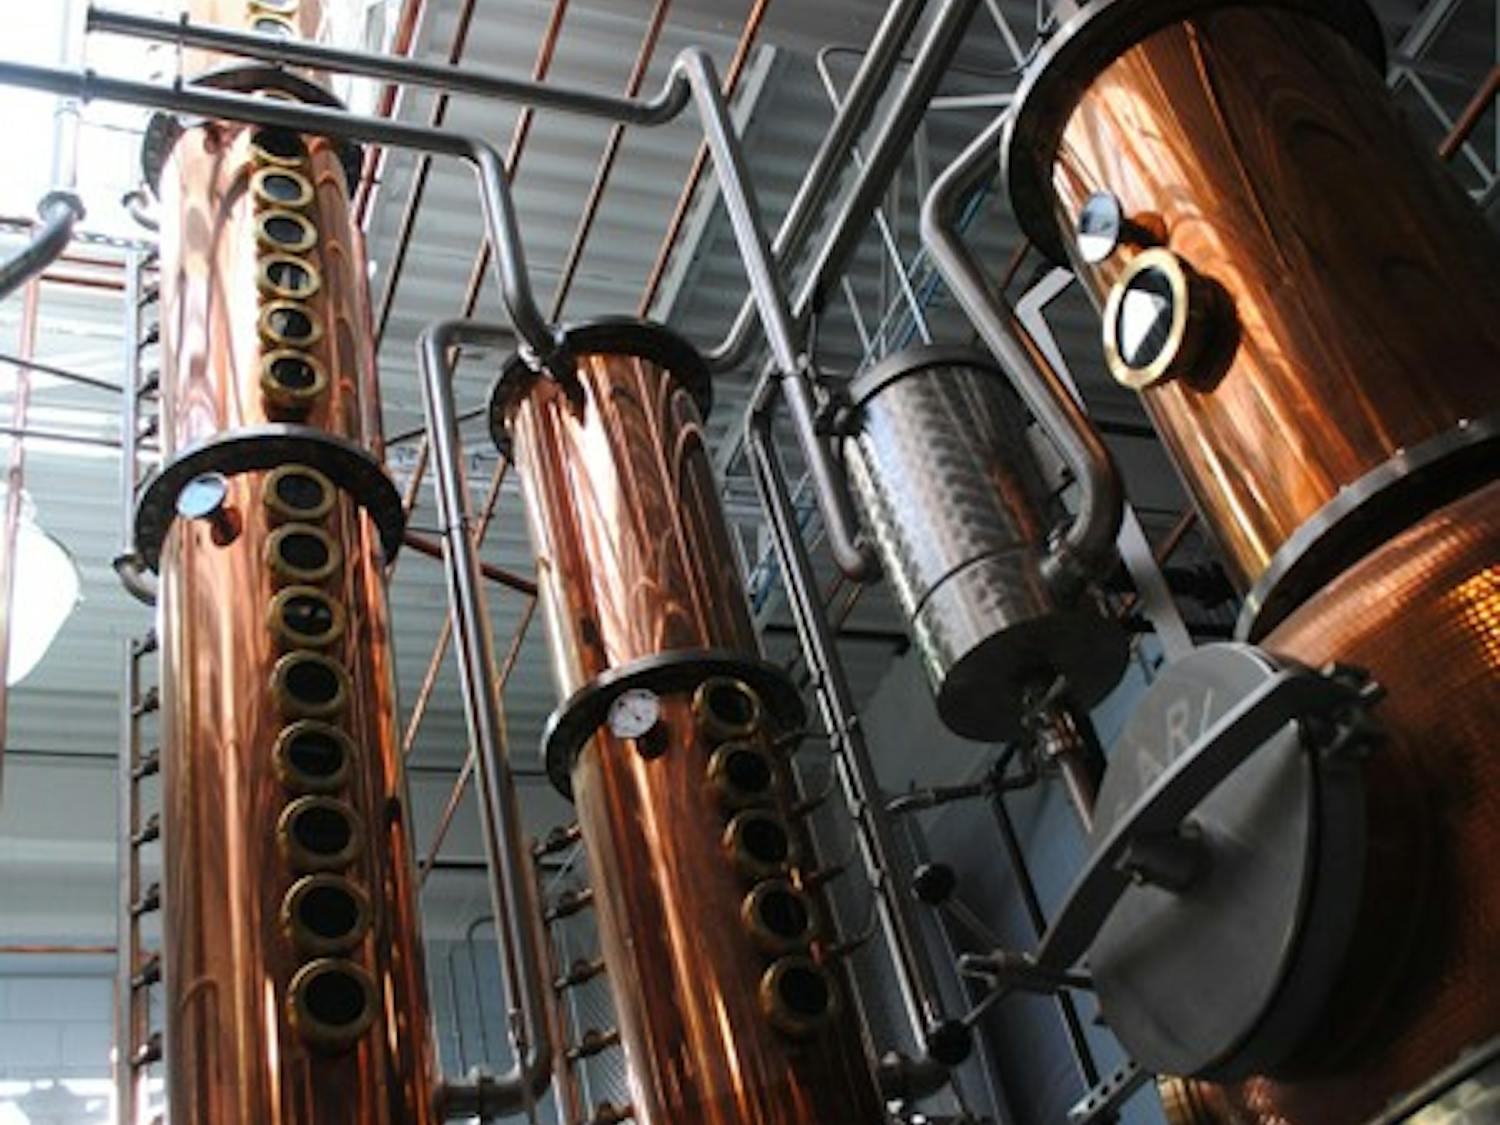 	Top of the Hill’s new distillery, which has been under construction for the past two and a half years, recently underwent a trial run to produce distilled alcohol.